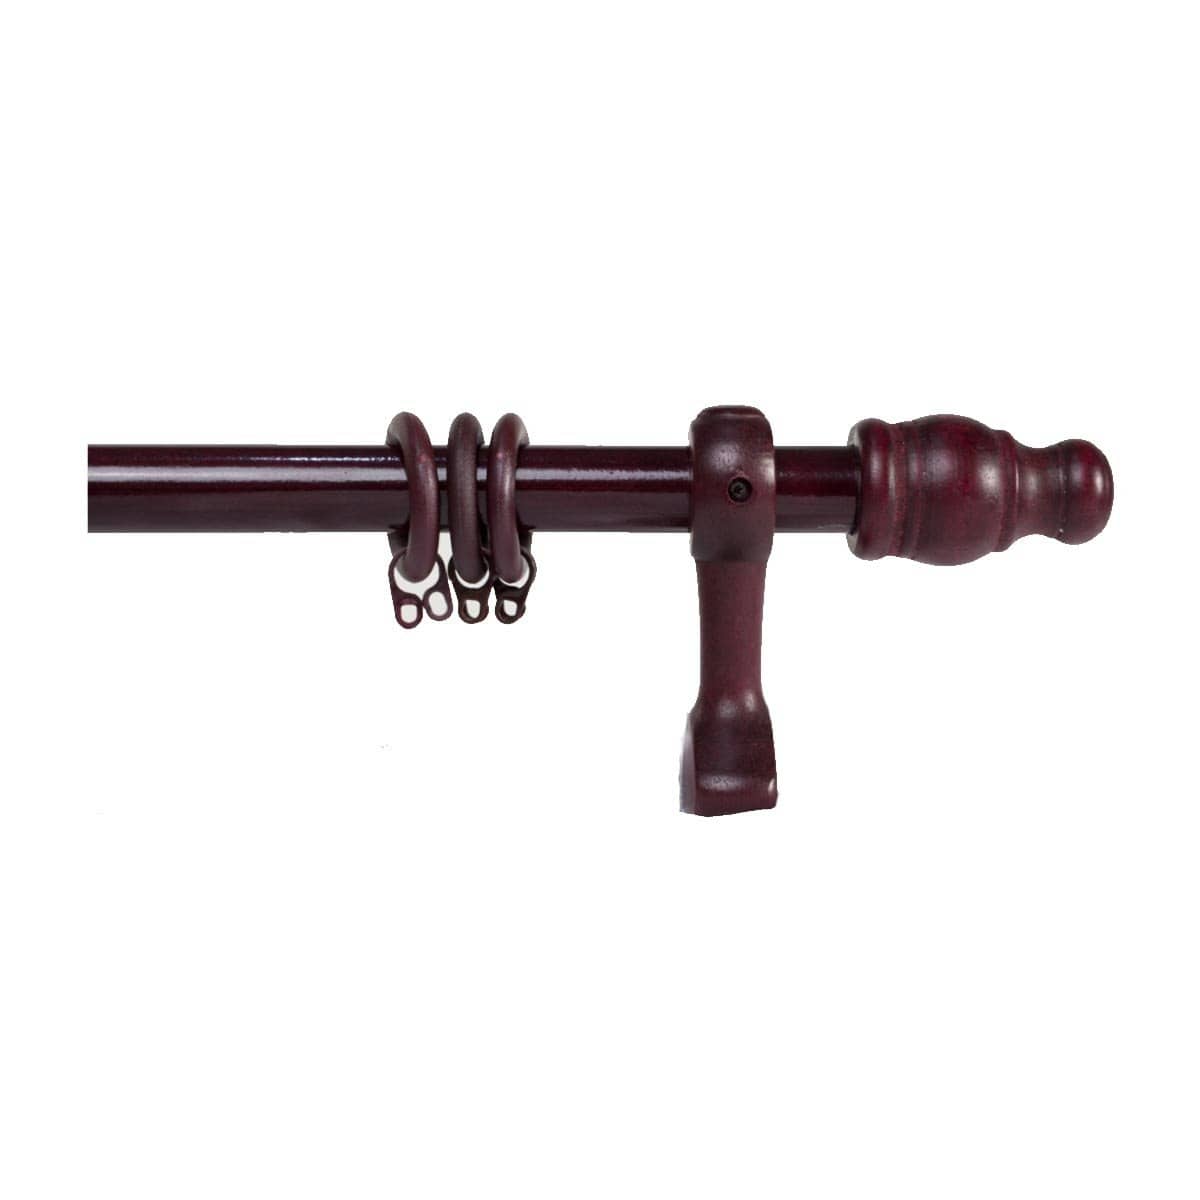 FWCR537 Wooden Curtain Rod 8' Rosewood